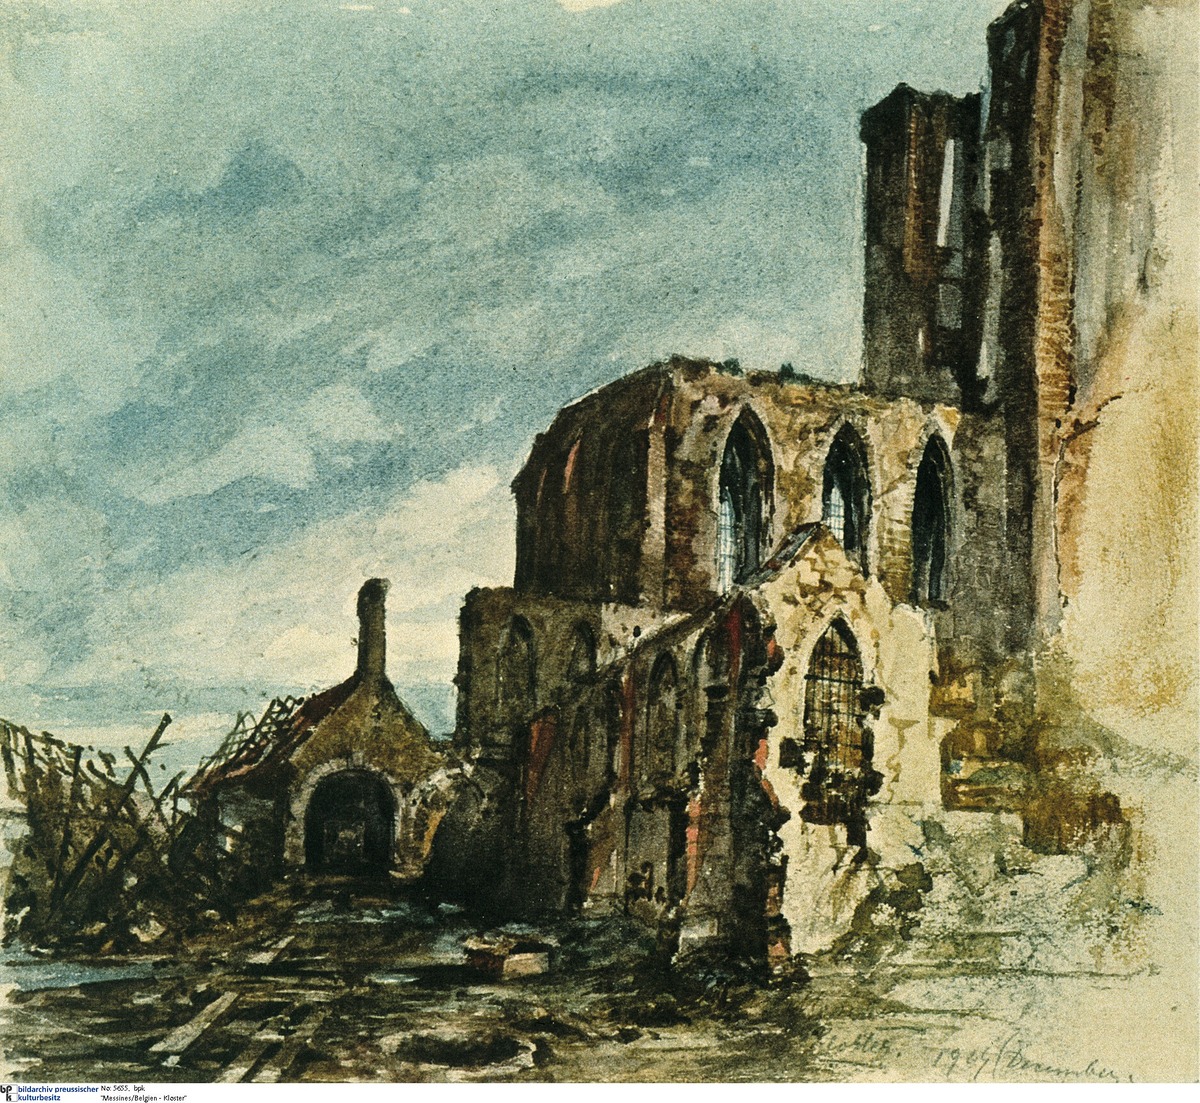 Hitler’s Watercolor of Ruins (1919) | German History in Documents and ...